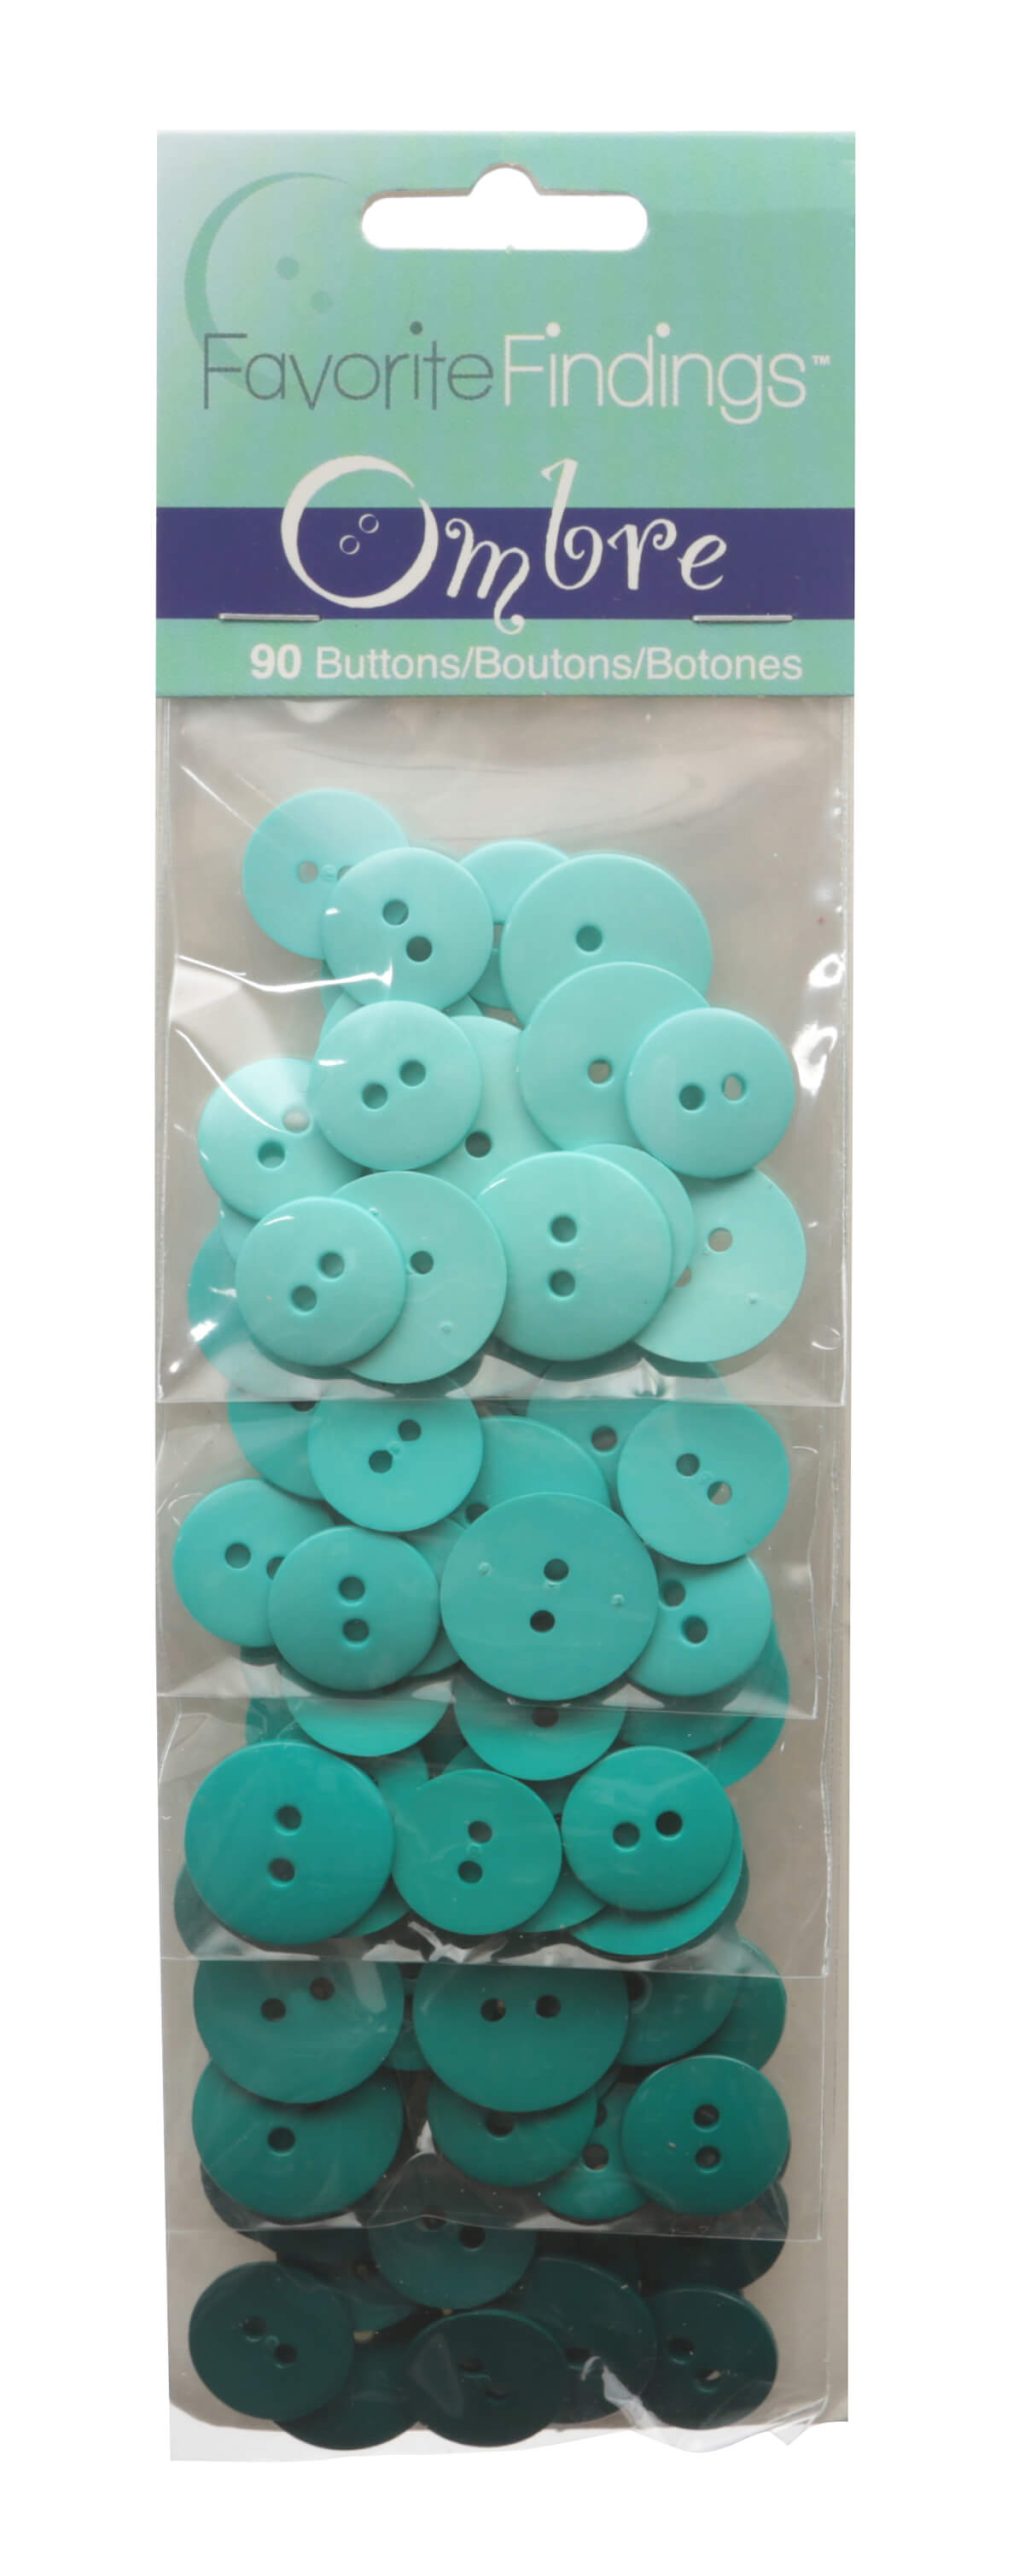 Ombre 90 Button Shade Pack - 5 Shades of Turquoise 16mm / 19mm Buttons